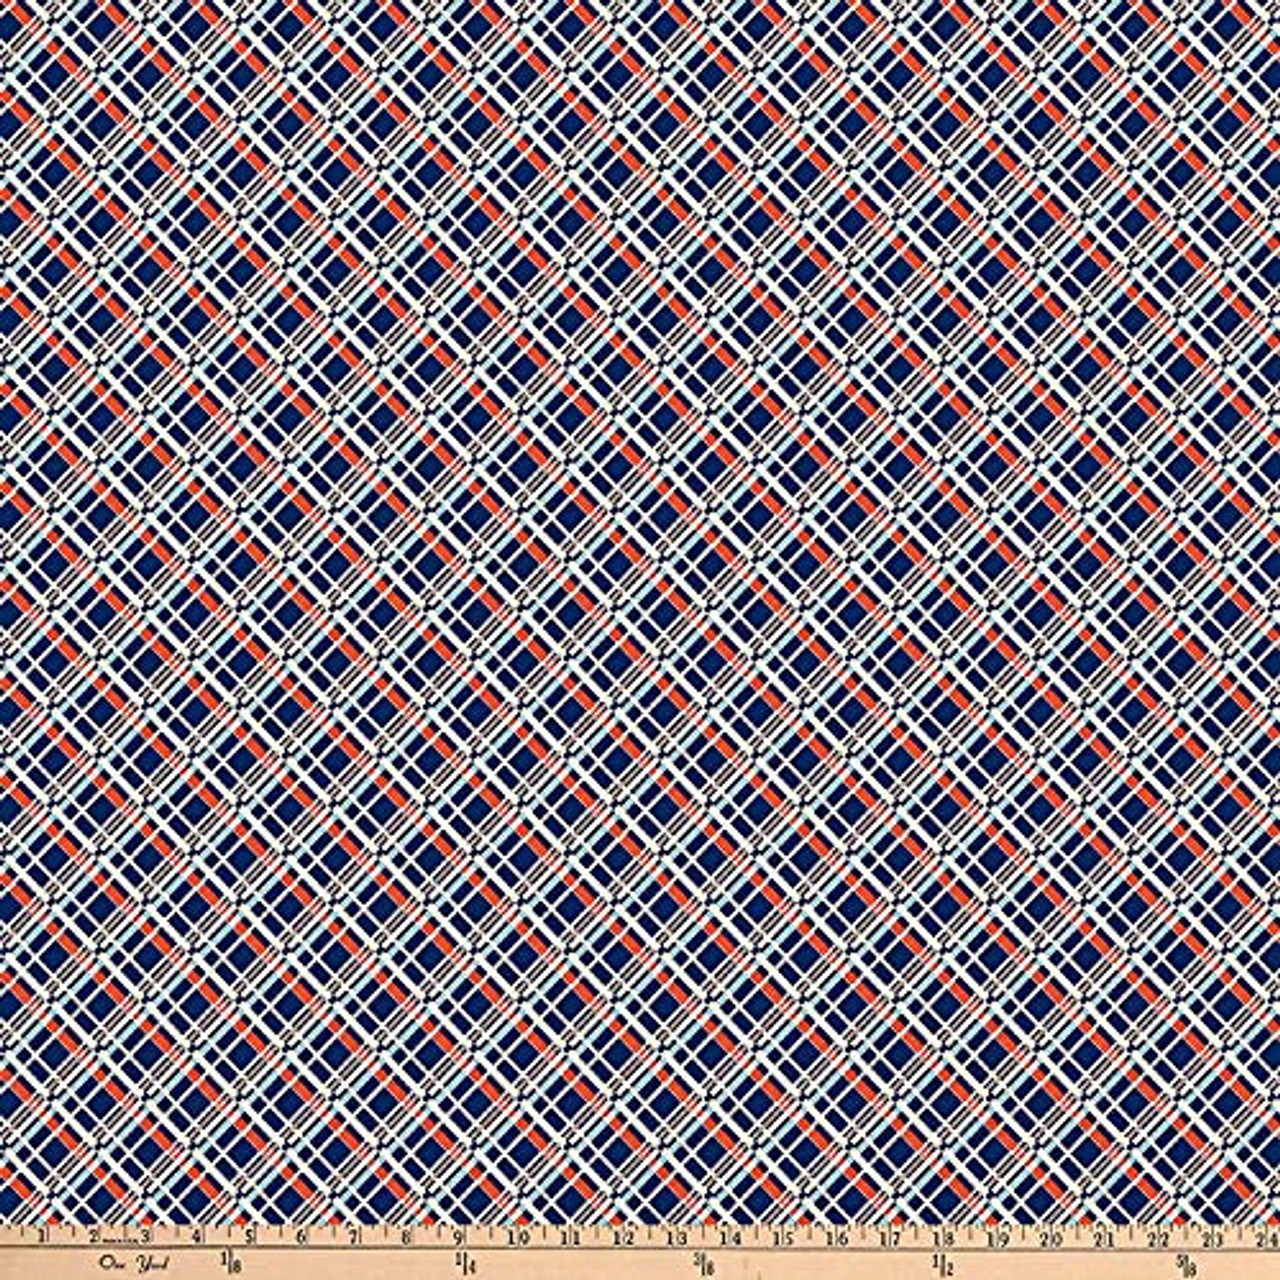 Denyse Schmidt PWDS145 Ludlow Off Plaid Forge Cotton Fabric By Yd